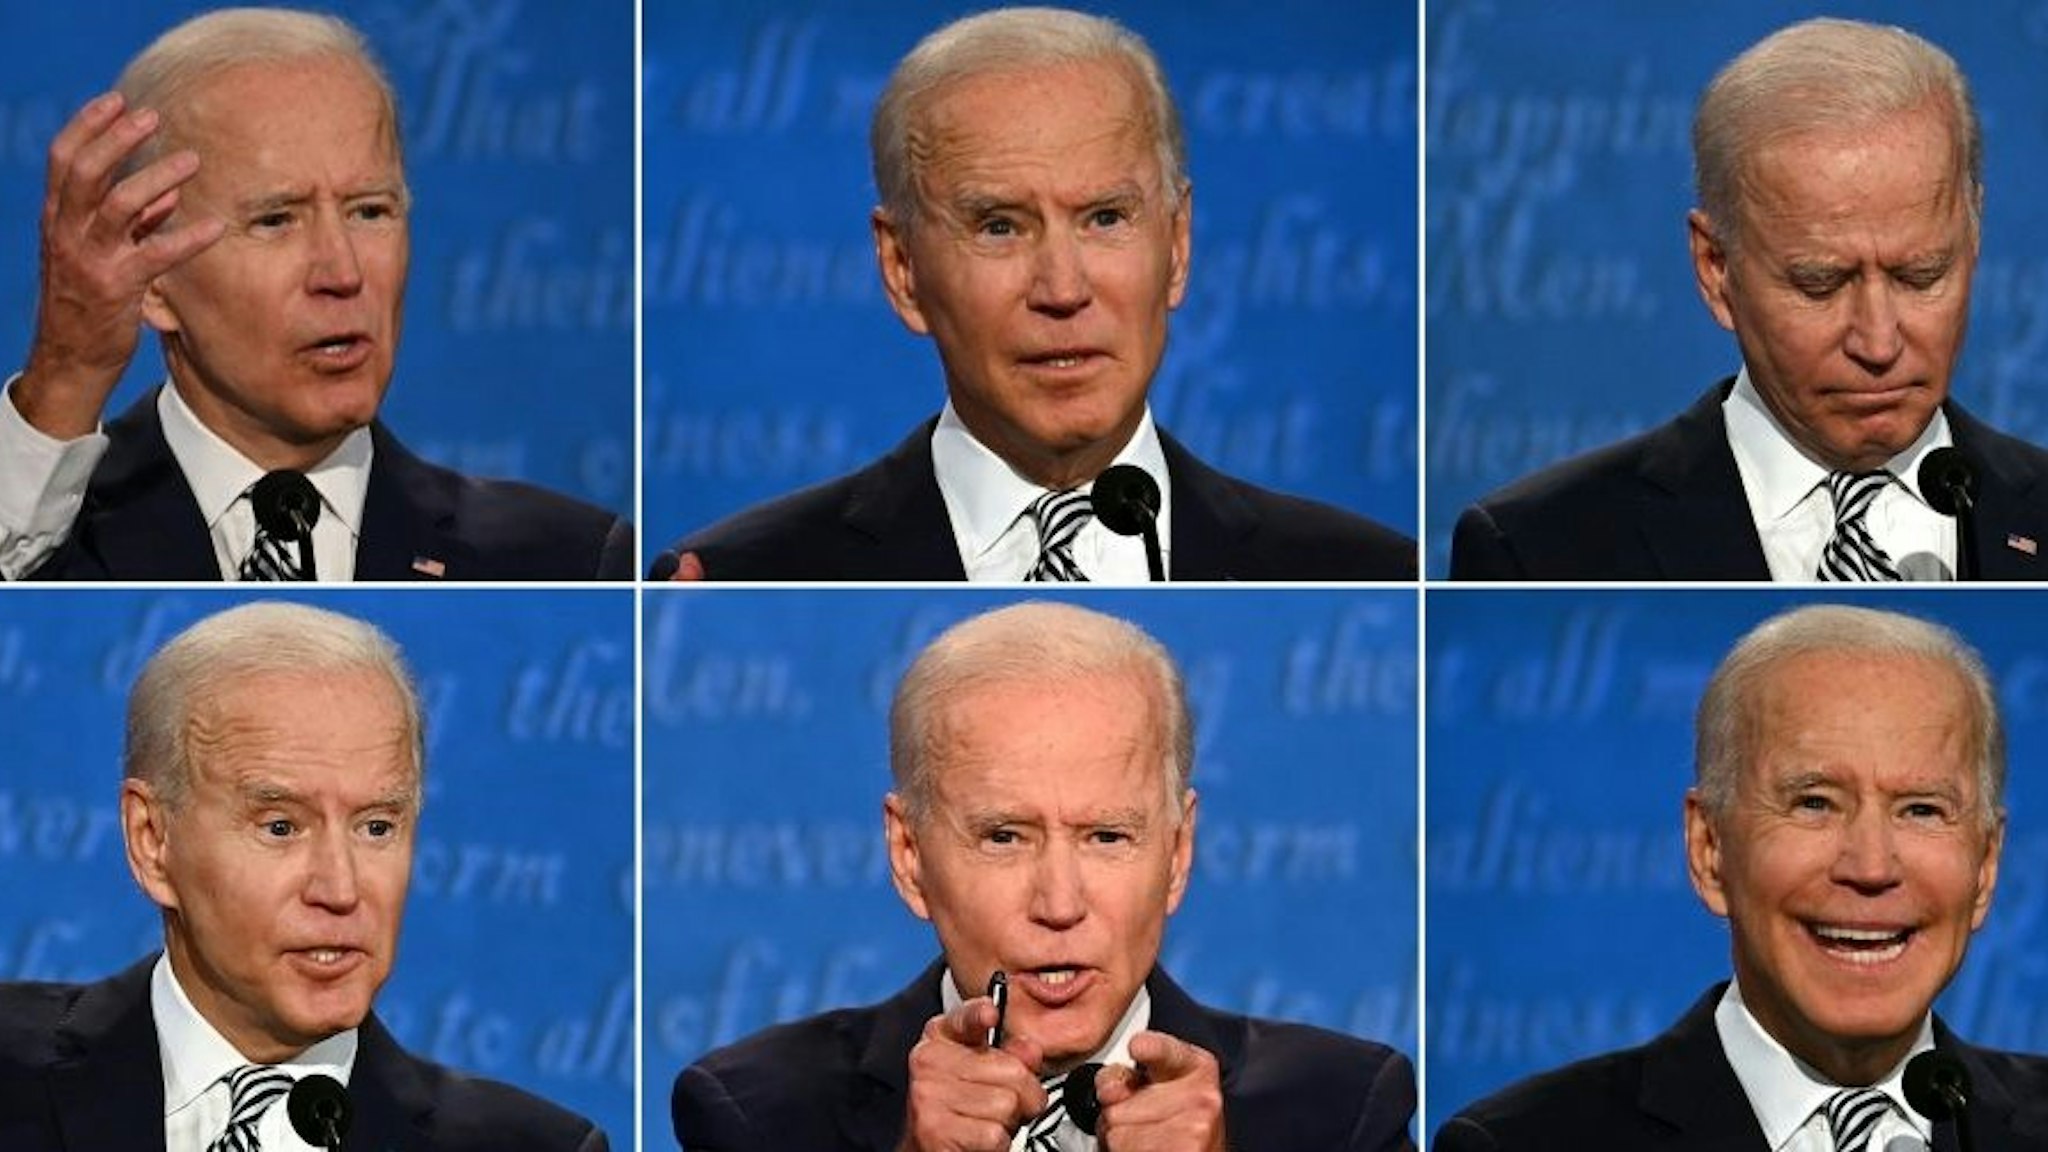 This combination of pictures created on September 29, 2020 shows Democratic Presidential candidate and former US Vice President Joe Biden during the first presidential debate opposite US President Donald Trump at the Case Western Reserve University and Cleveland Clinic in Cleveland, Ohio on September 29, 2020. (Photos by JIM WATSON / AFP) (Photo by